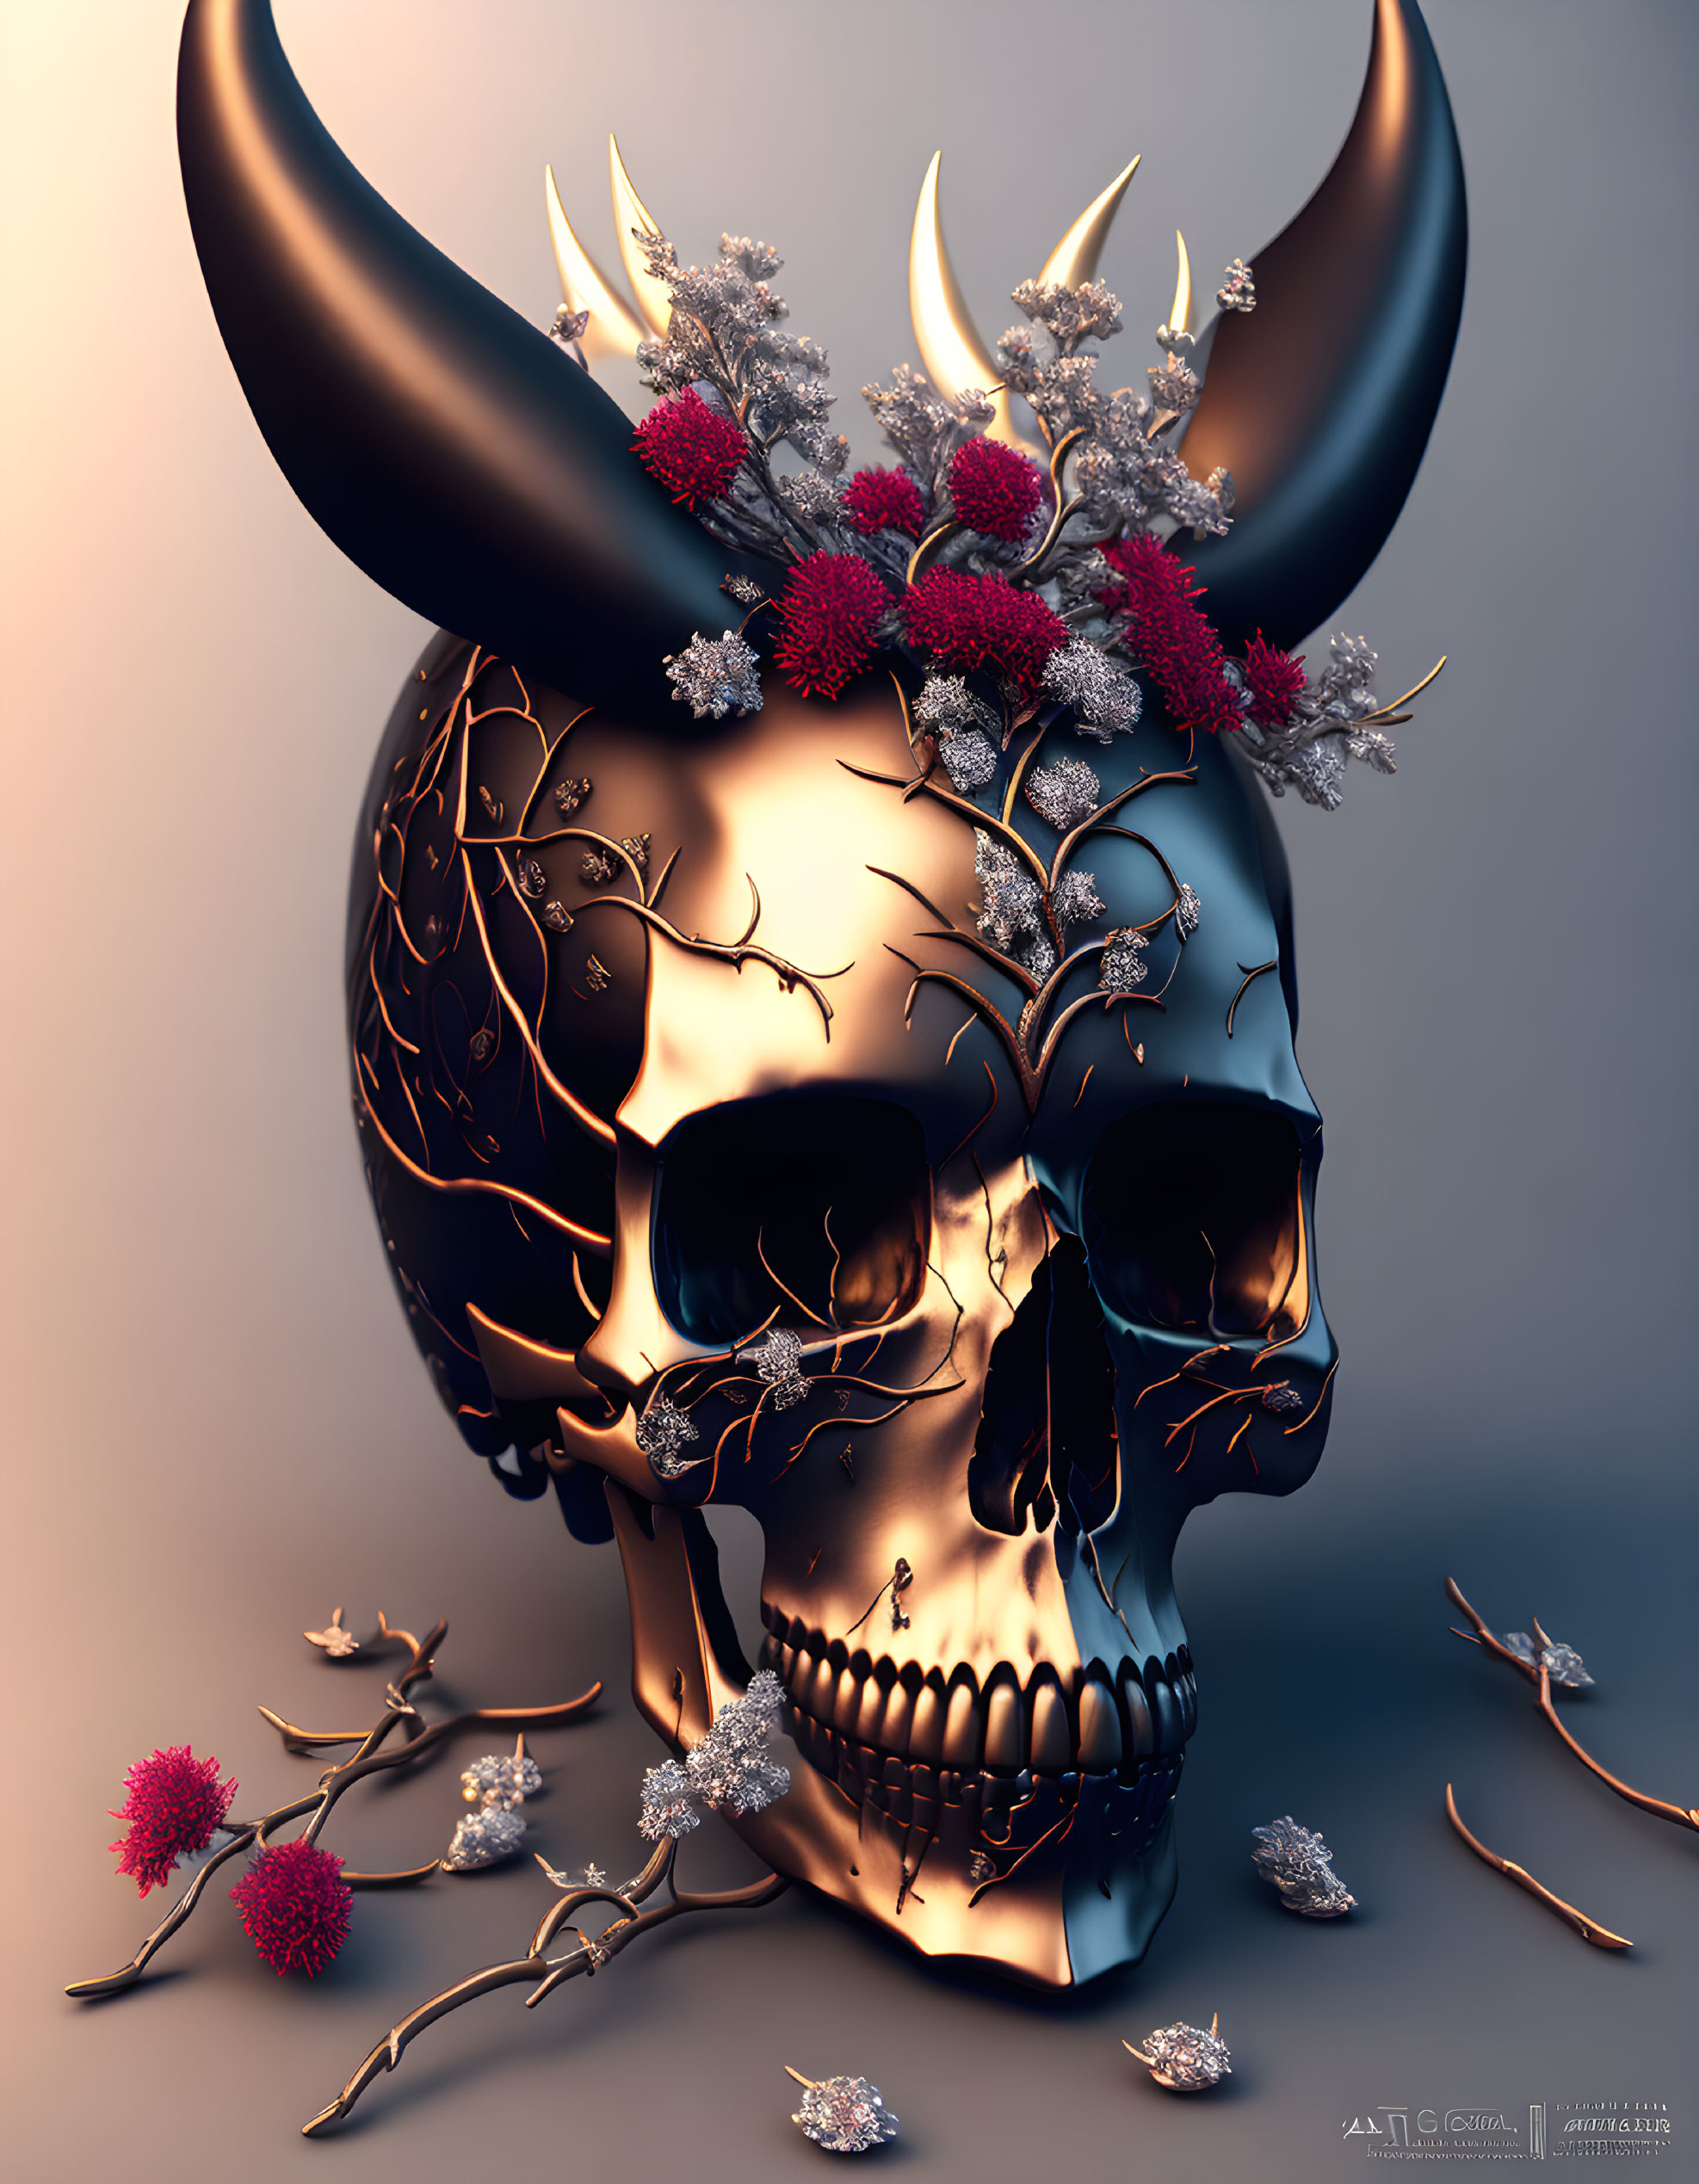 3D-rendered black skull with glowing cracks, golden branches, red flowers, and large horns on